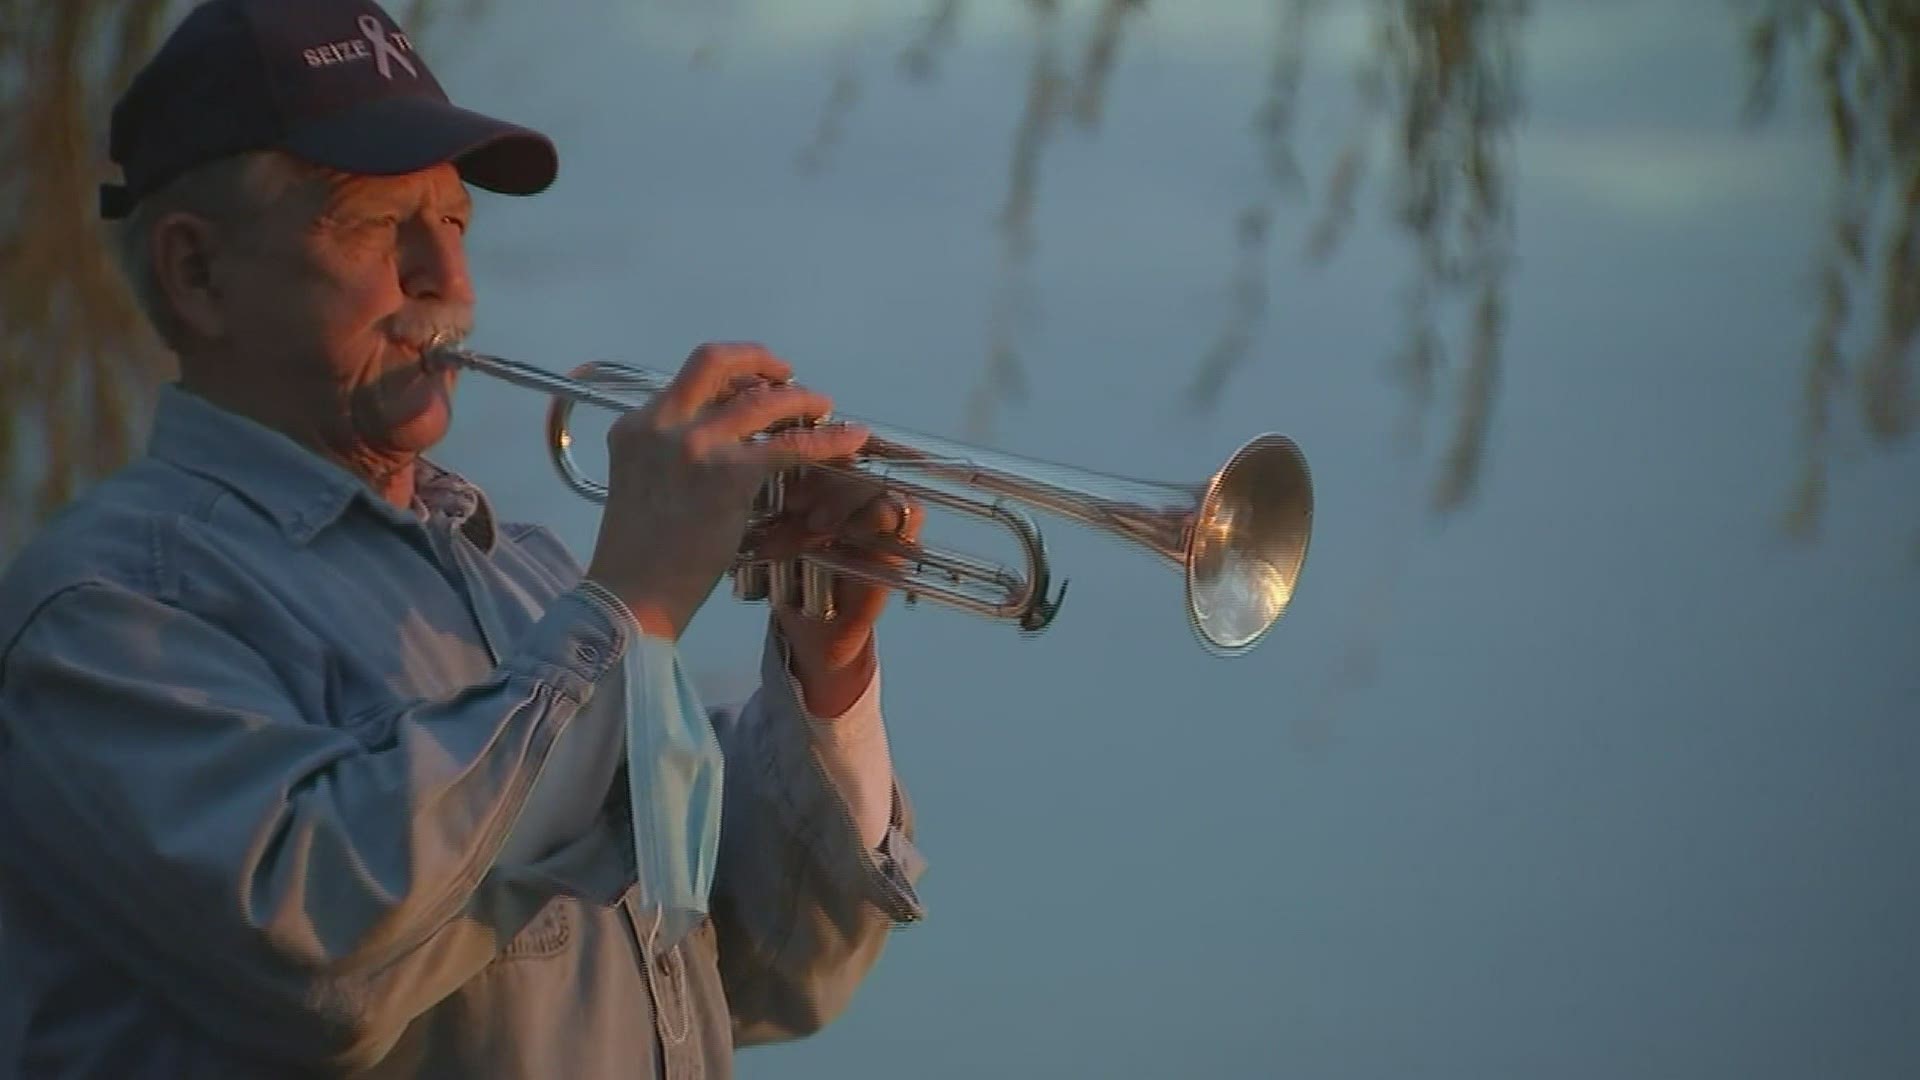 A Crystal Lake, Illinois man has played taps every night since Memorial Day to honor veterans.